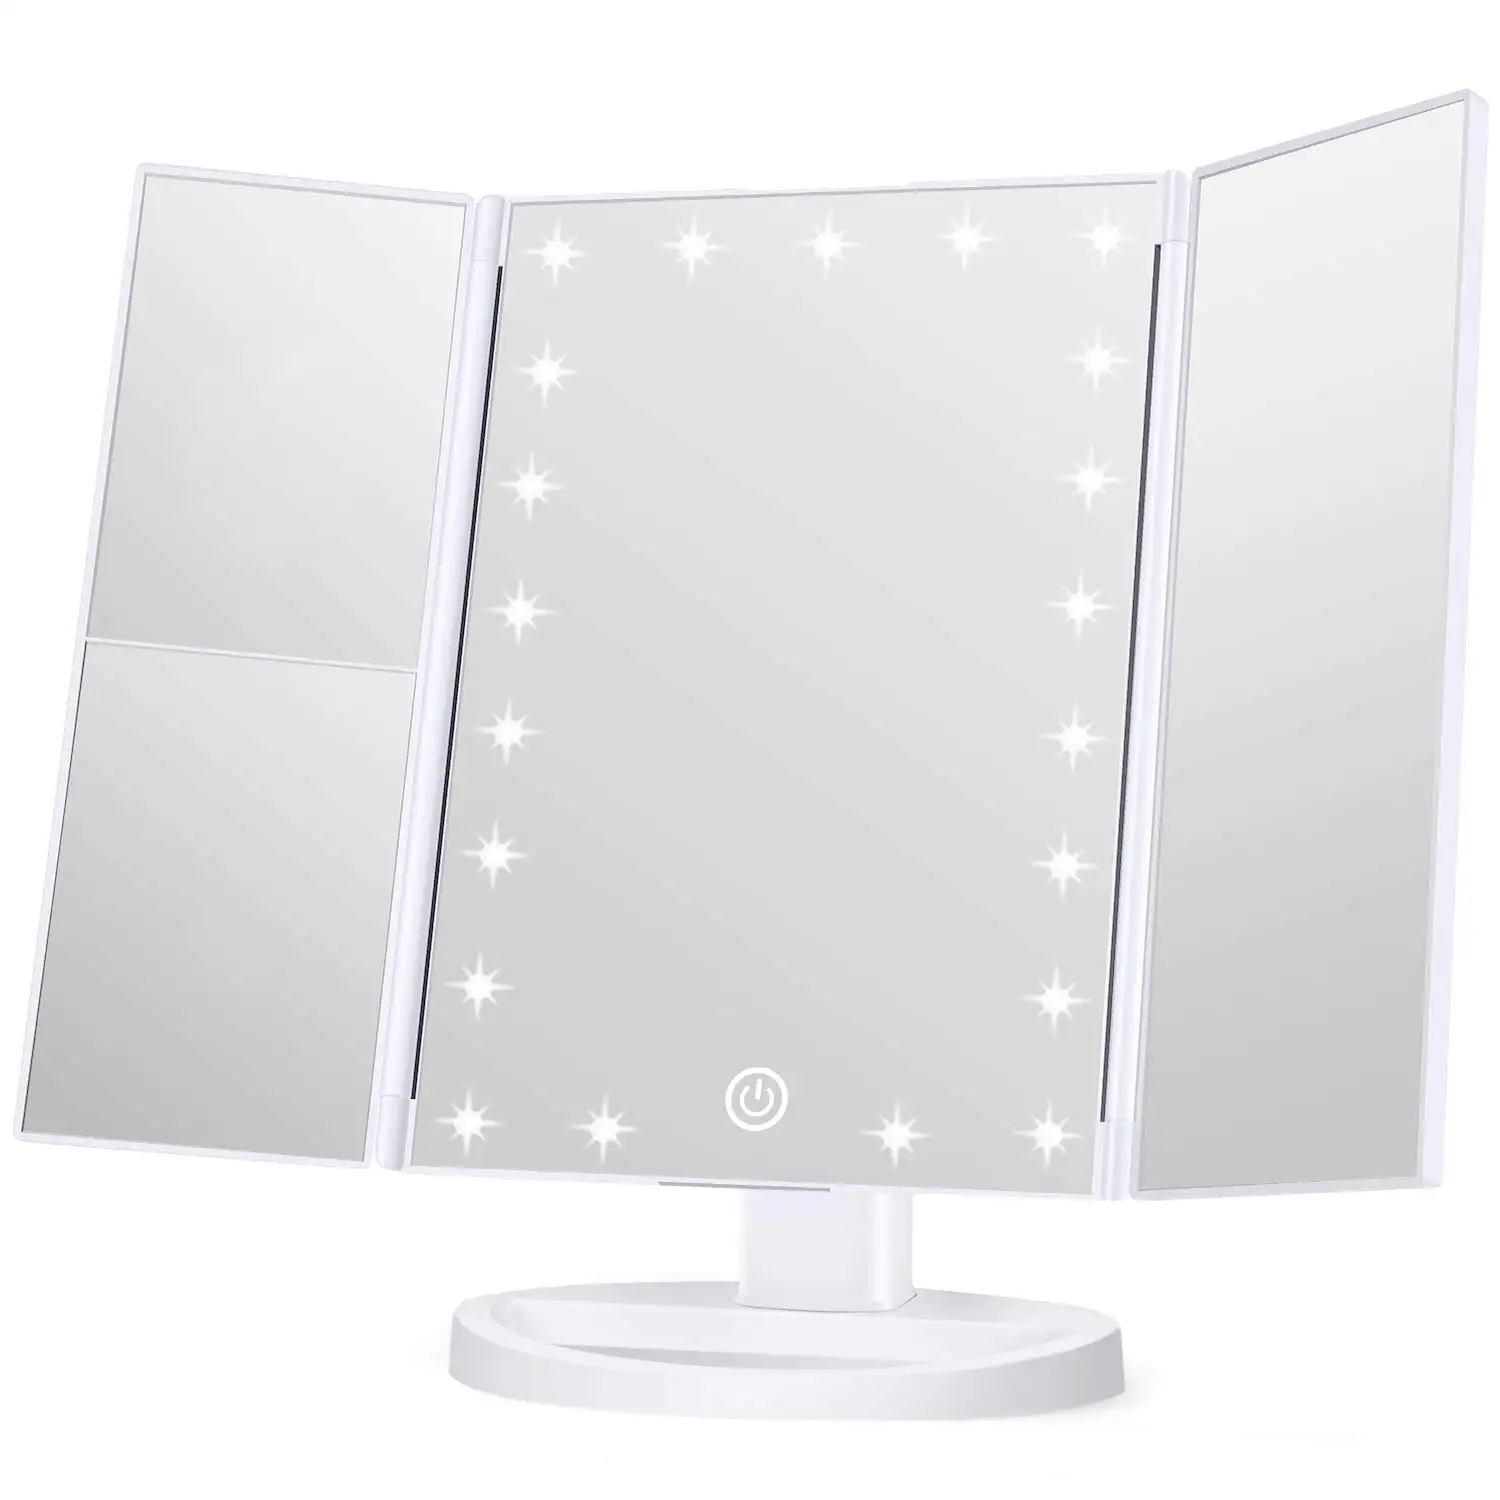 Hot sale LED Lighted Mirror Dimmable Table Countertop Cosmetic Mirror with Touch Screen Switch Batteries or USB Operated